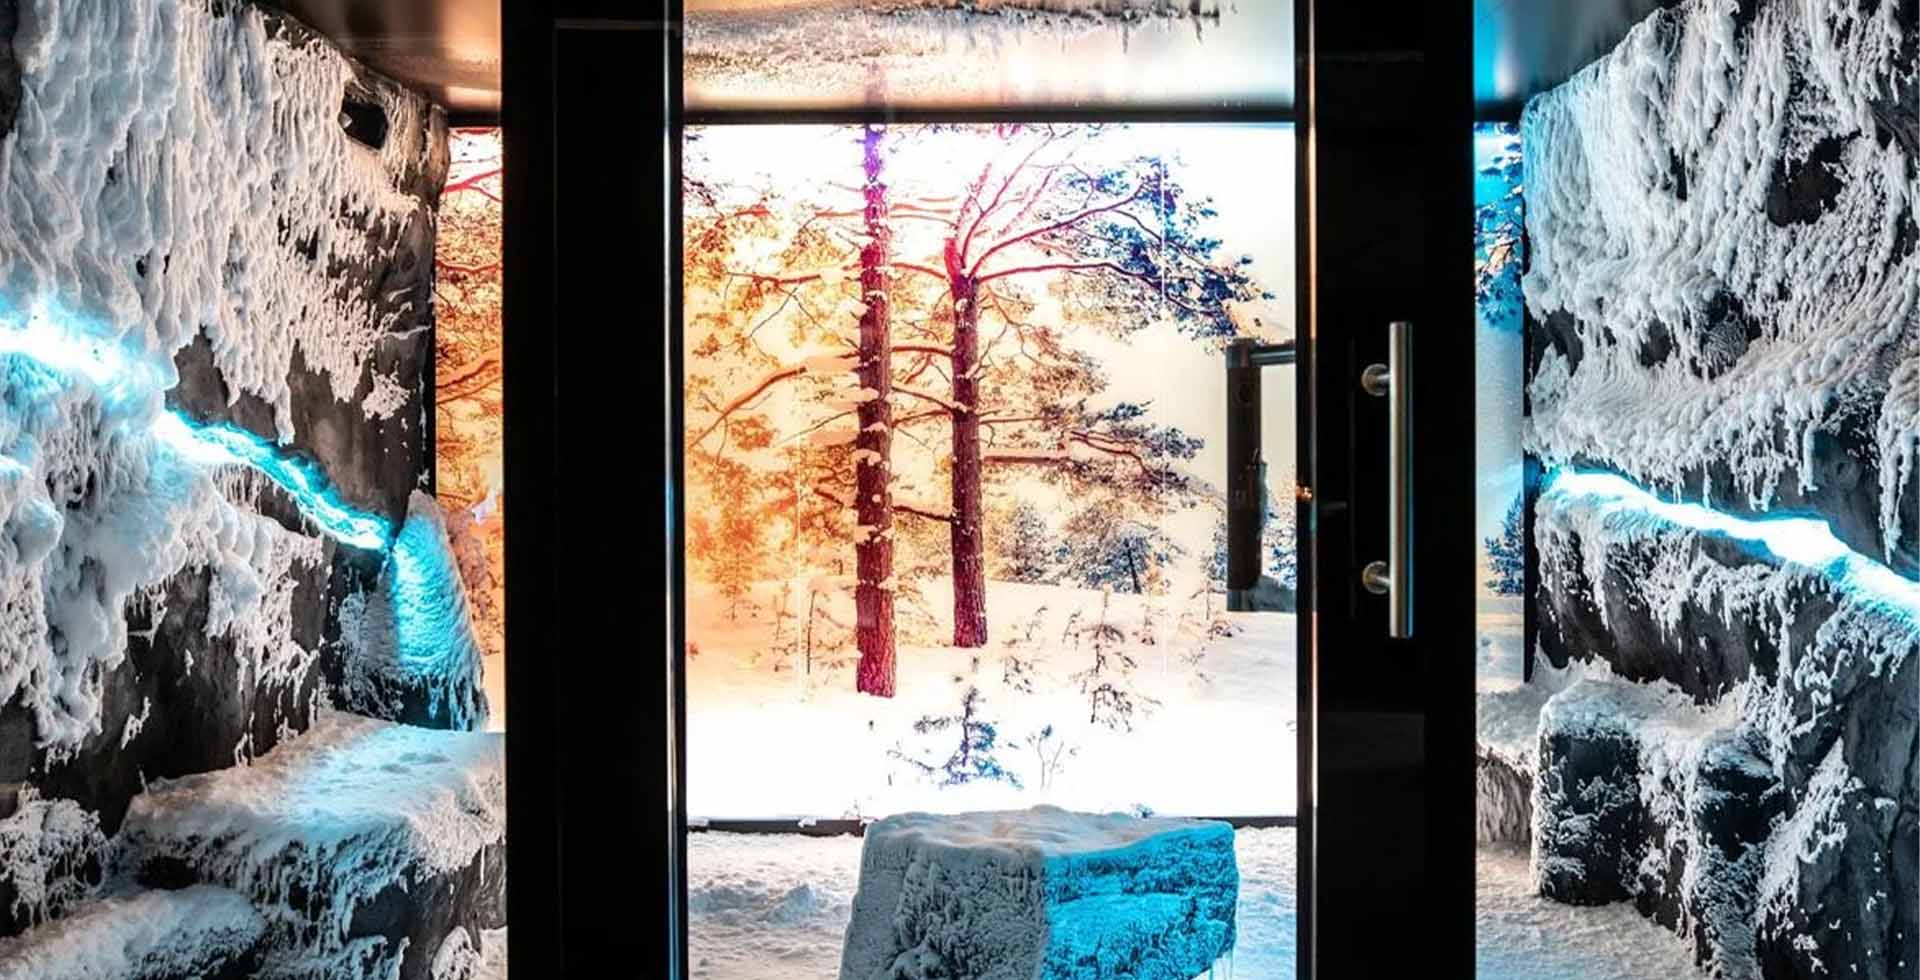 Netherlands Frosty Escape: Buy into the Dutch winter, build a snow room sanctuary. Explore designs that seamlessly merge style and cost-effectiveness.